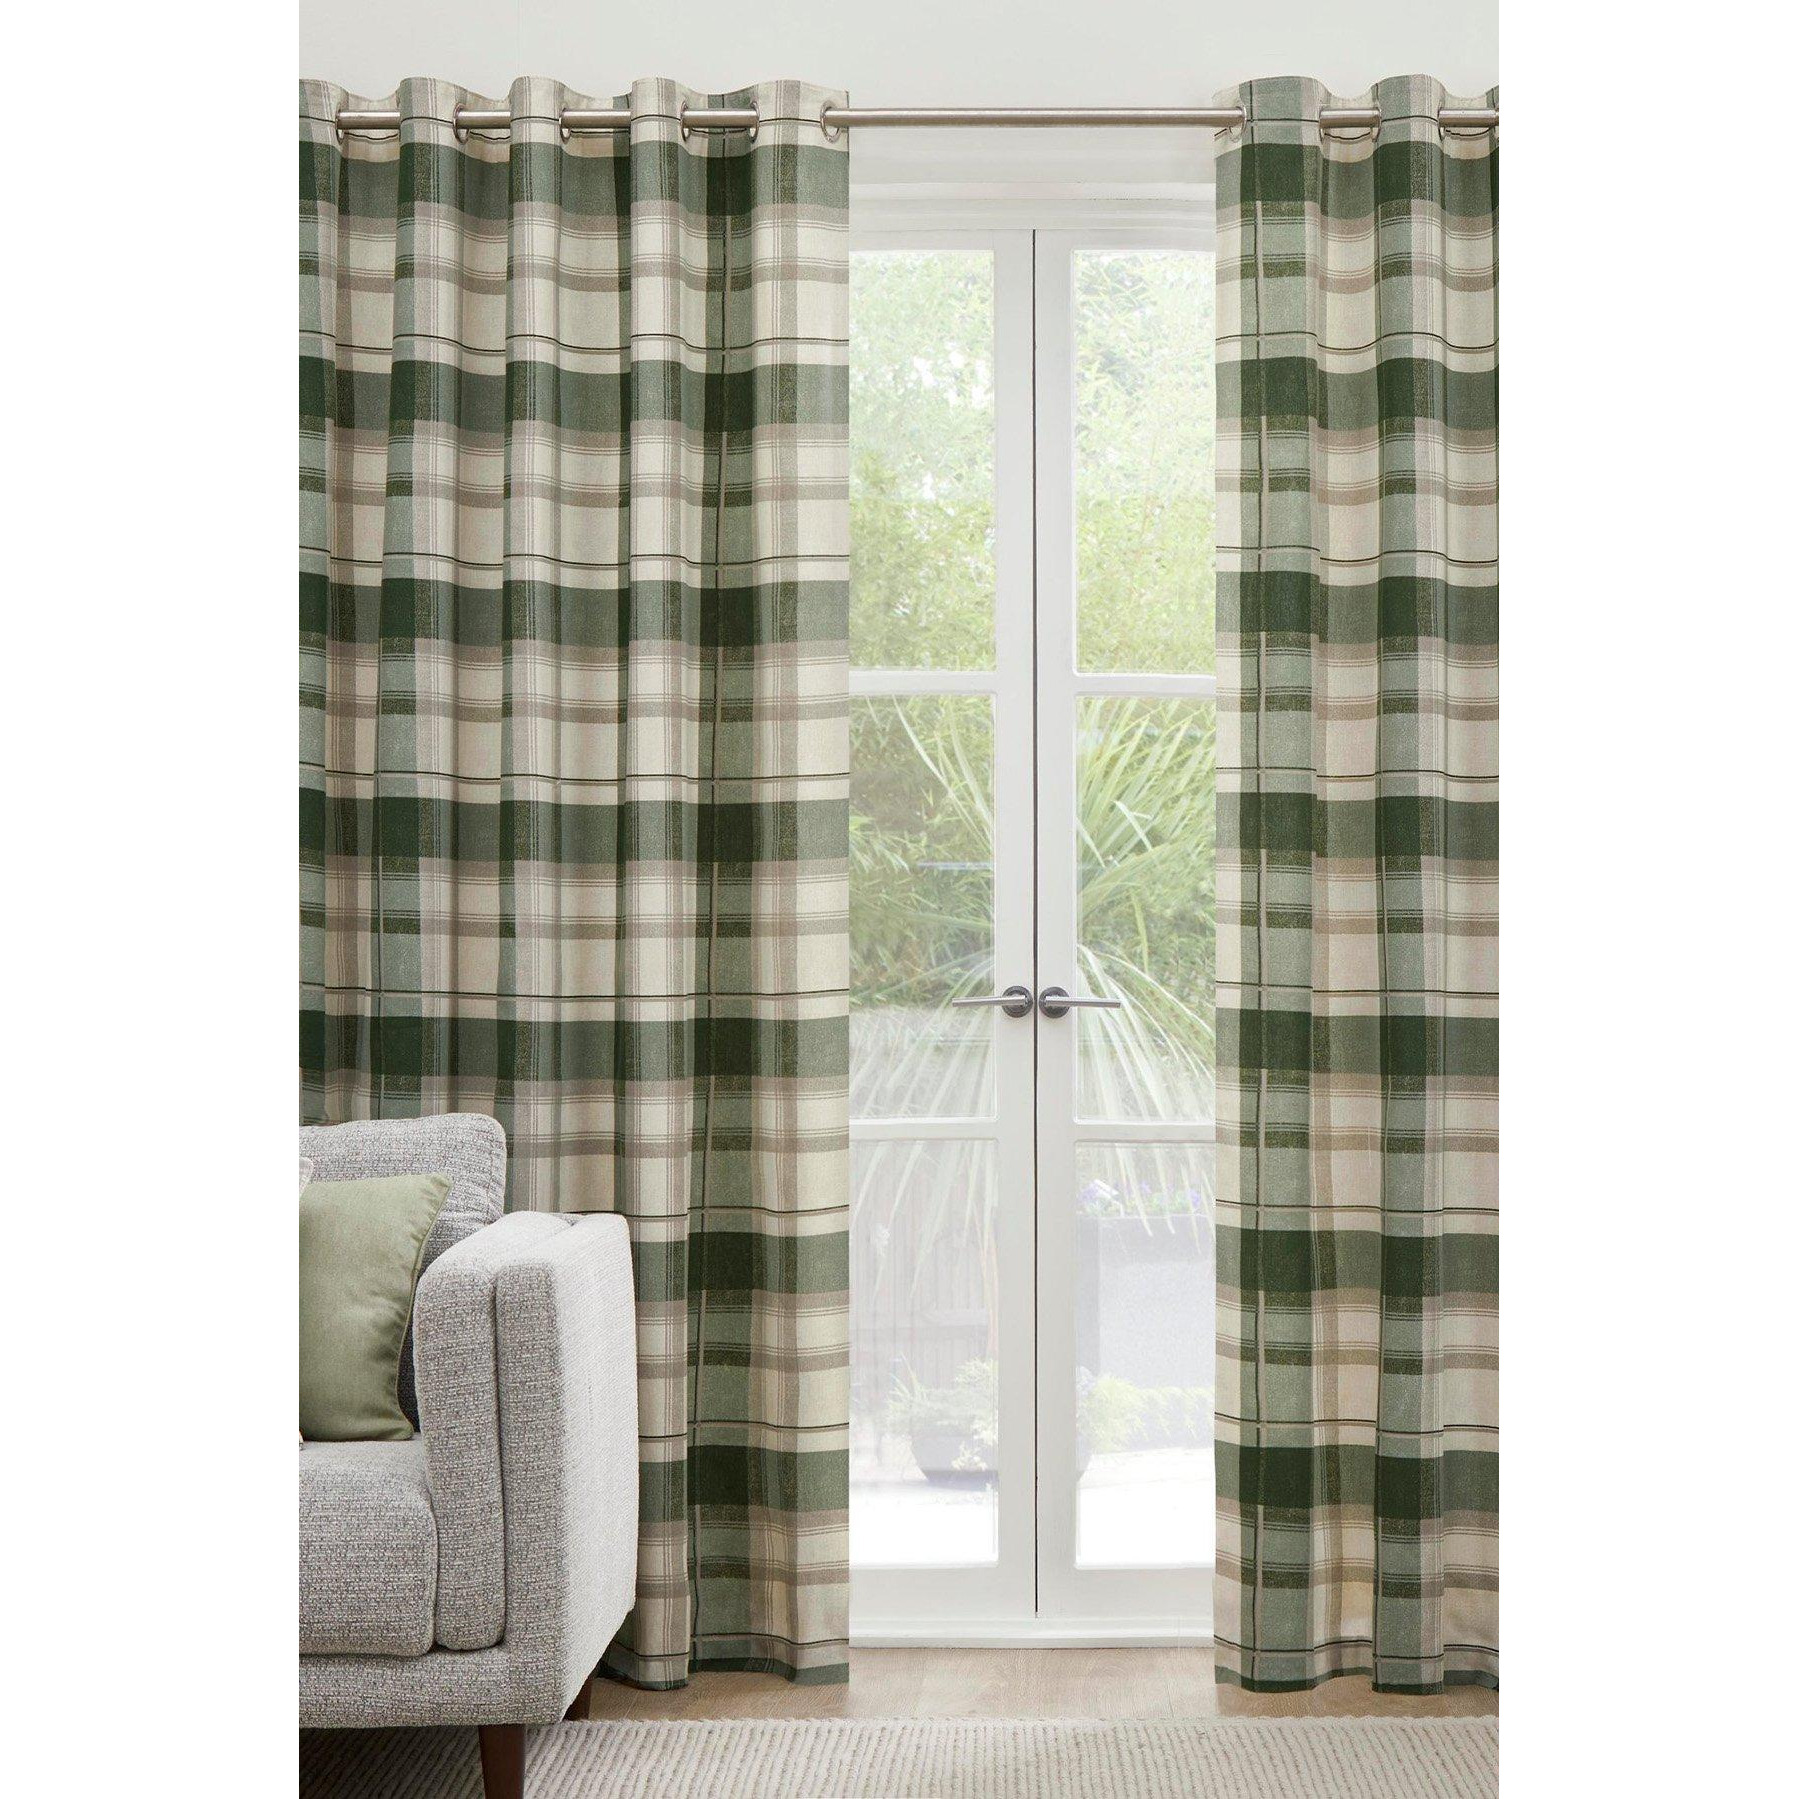 'Balmoral Check' Country Checked Pattern Pair of Eyelet Curtains - image 1